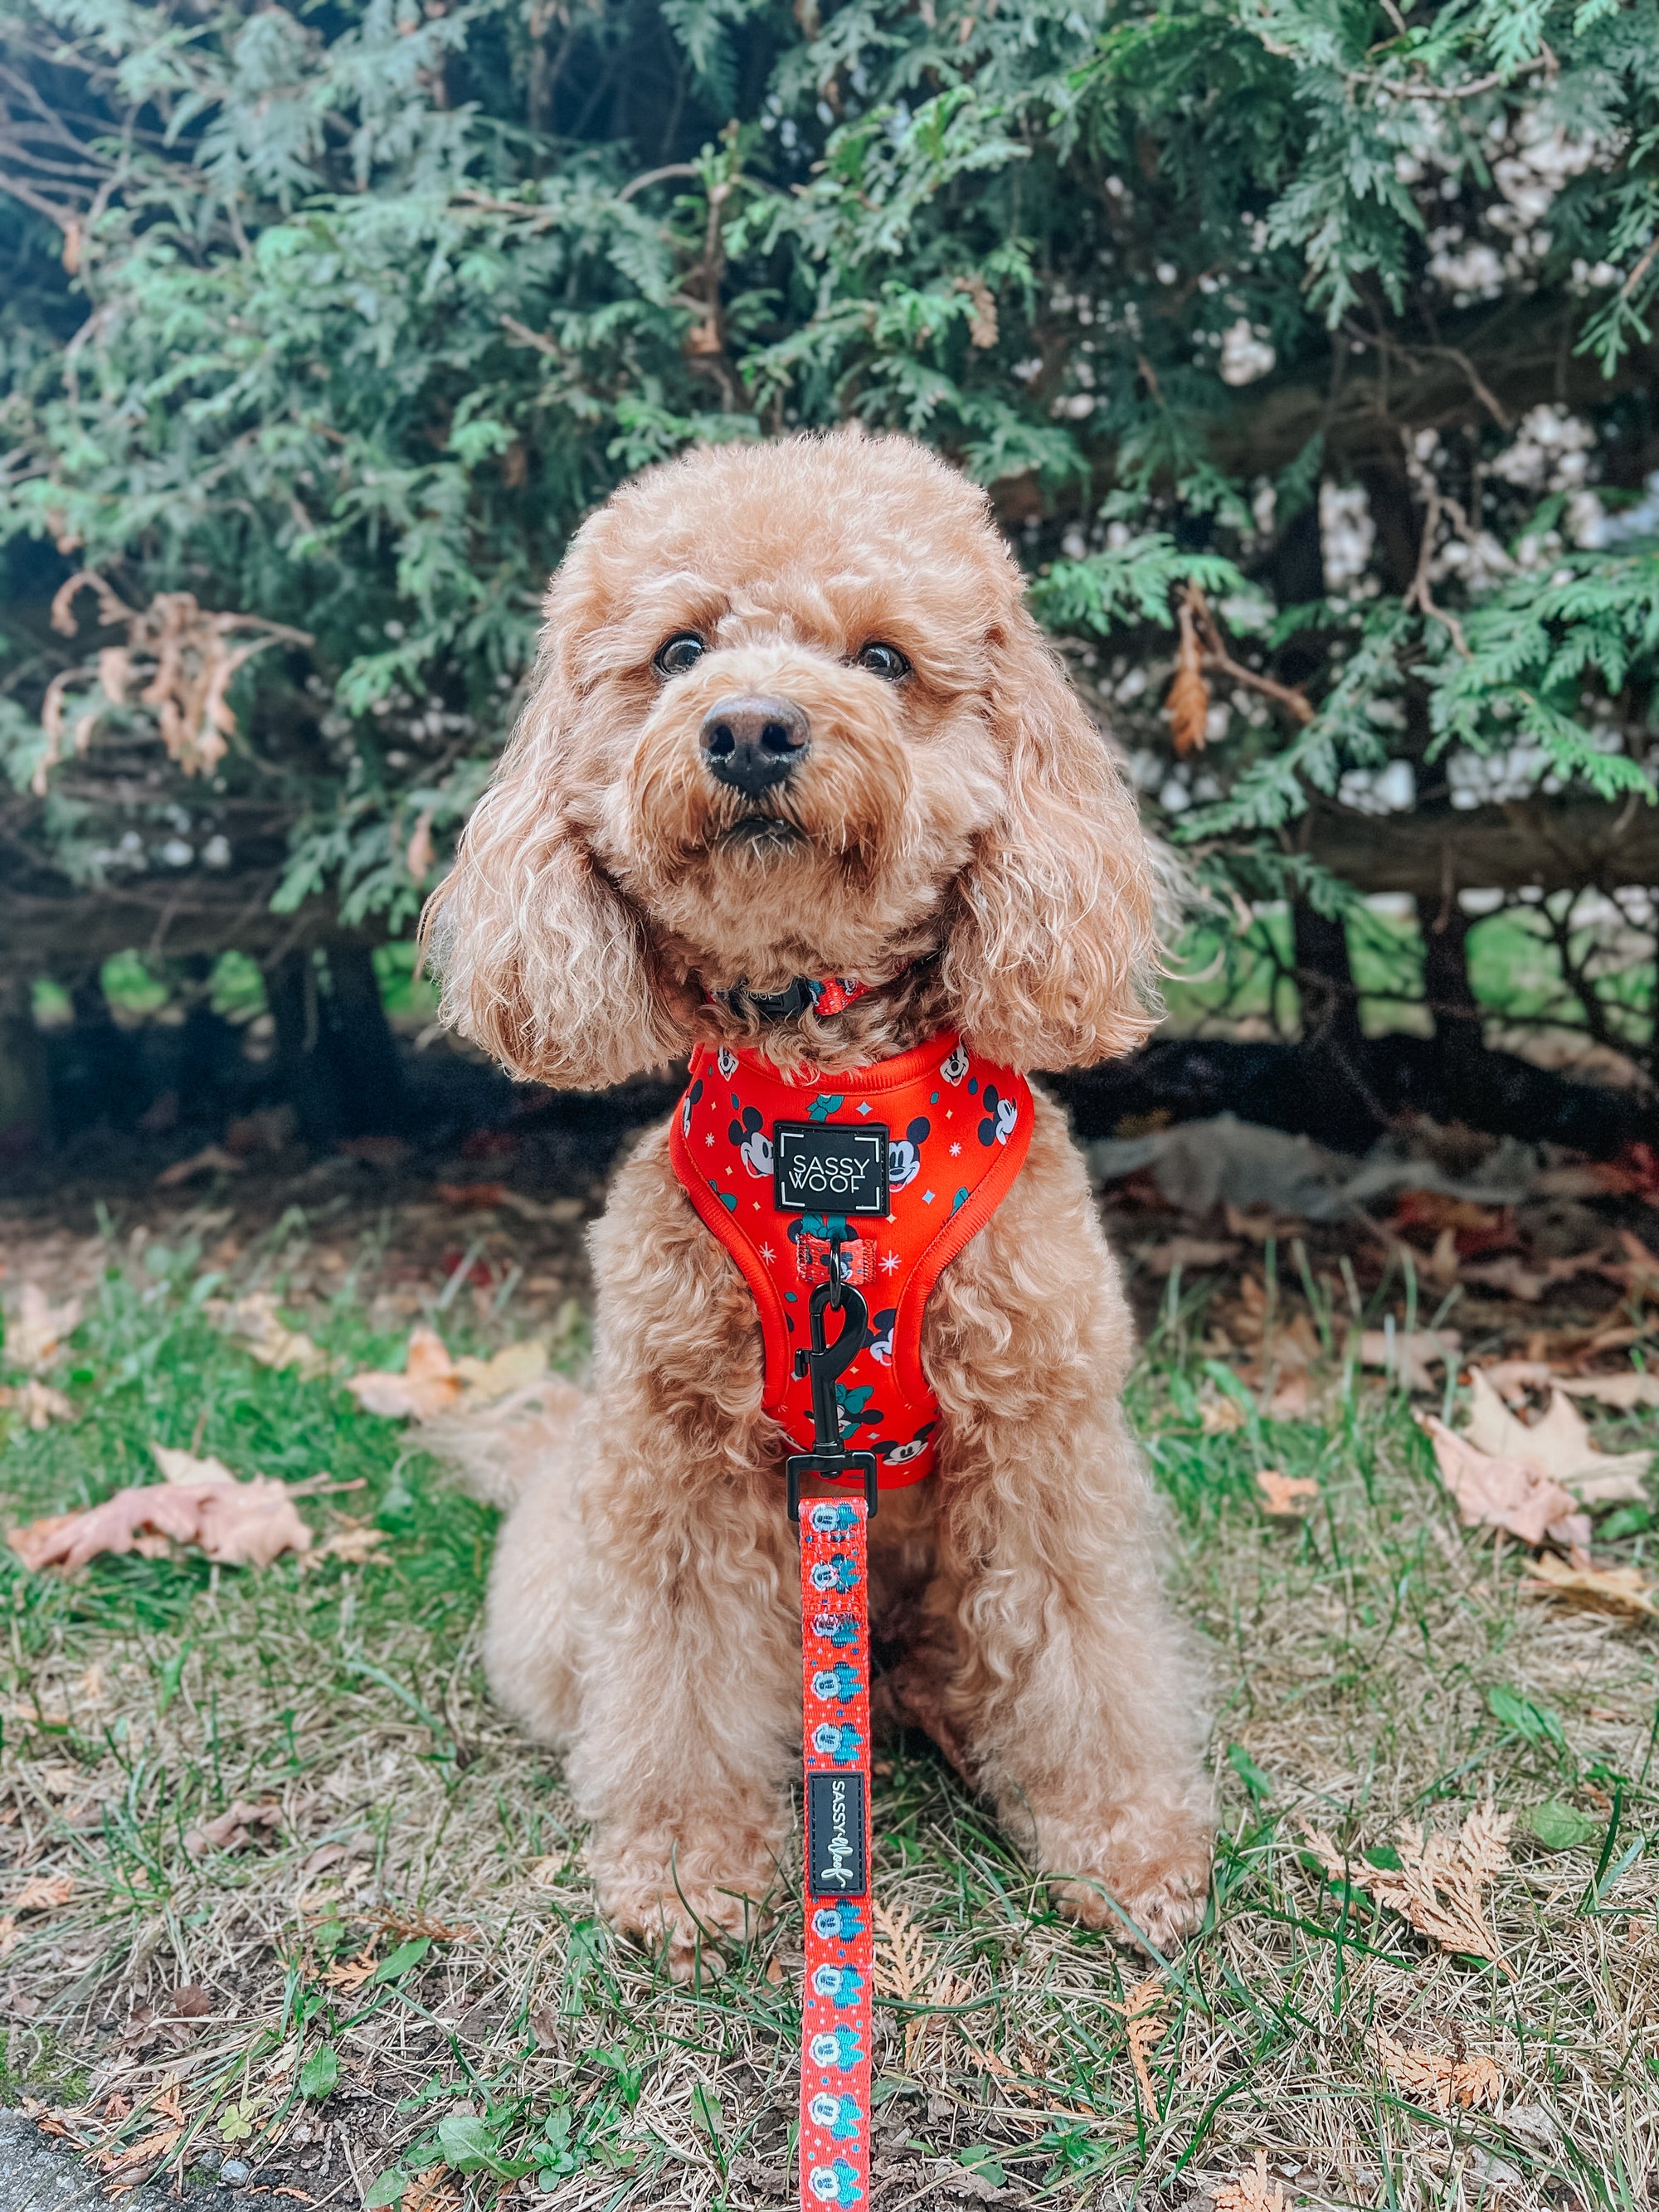 INFLUENCER_CONTENT | @GEORGIE.THECAVAPOO | SIZE S